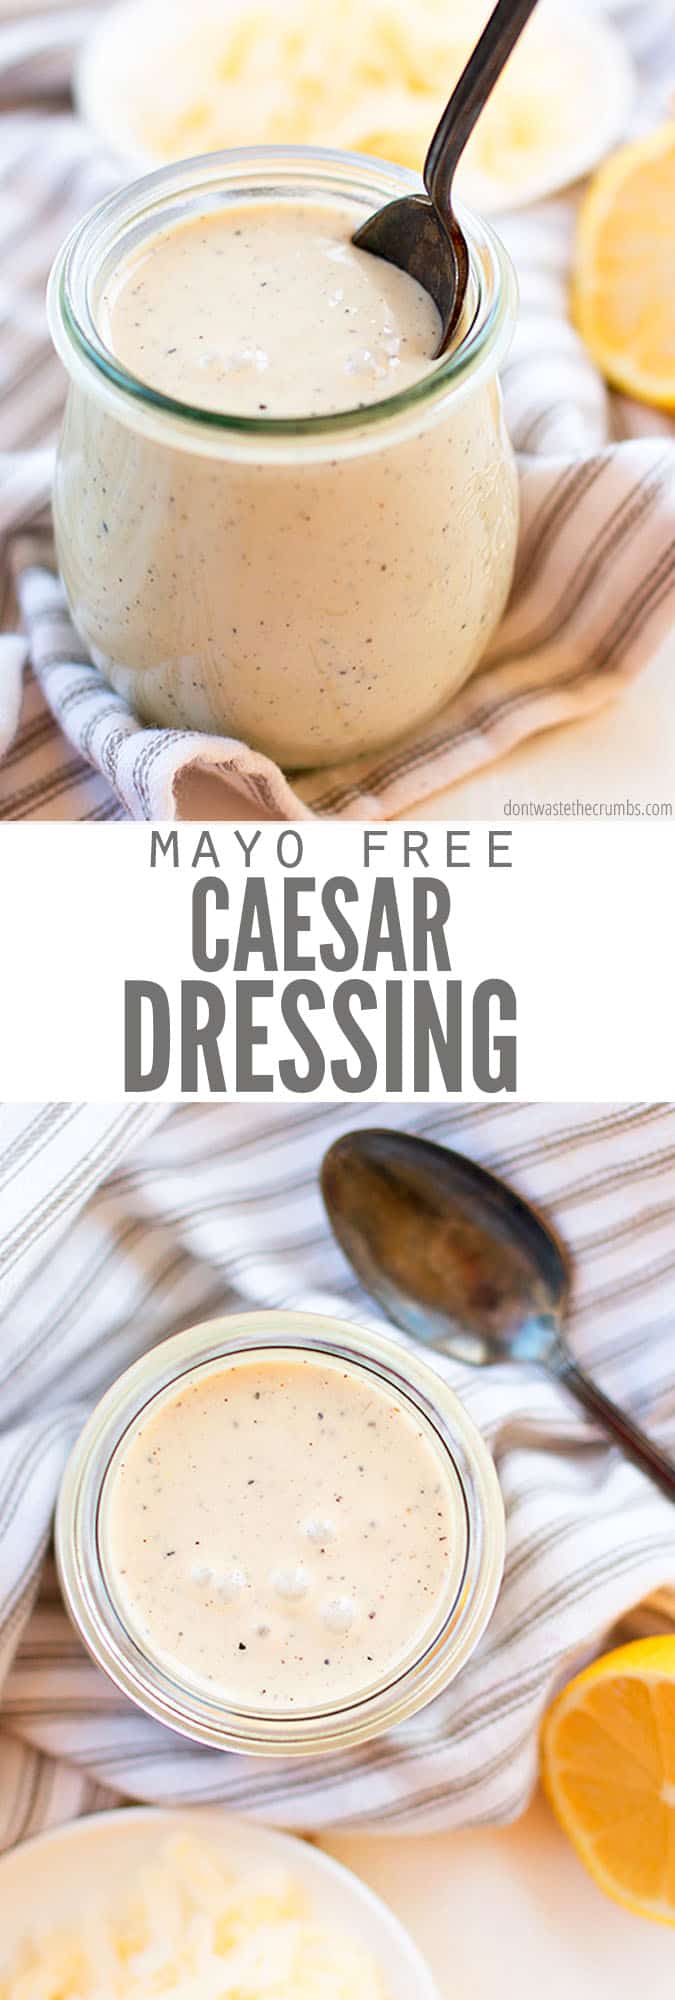 This flavorful, quick and easy No-Mayo Caesar Salad Dressing is made with healthy probiotics, and can be made dairy-free.